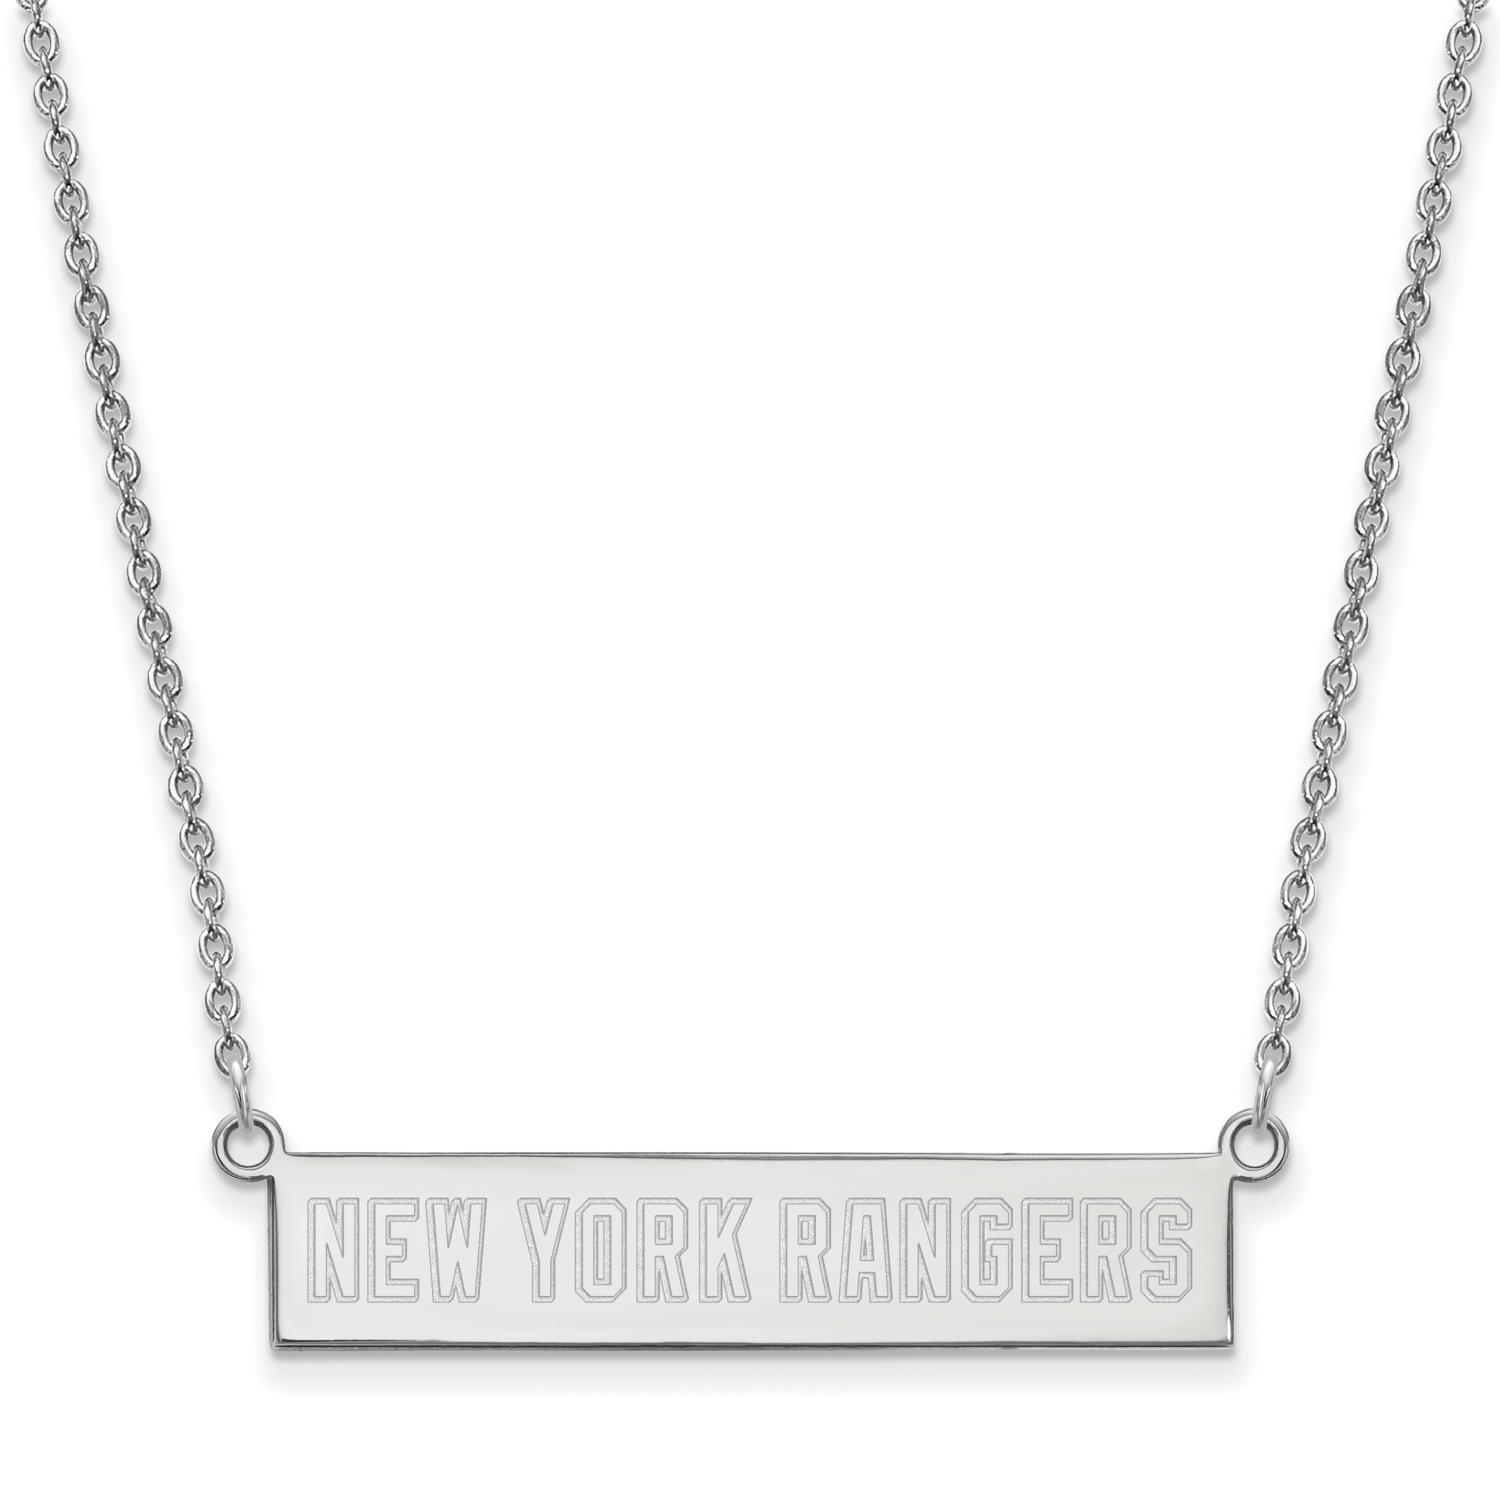 New York Rangers Small Bar Necklace Sterling Silver Rhodium-plated SS033RNG-18